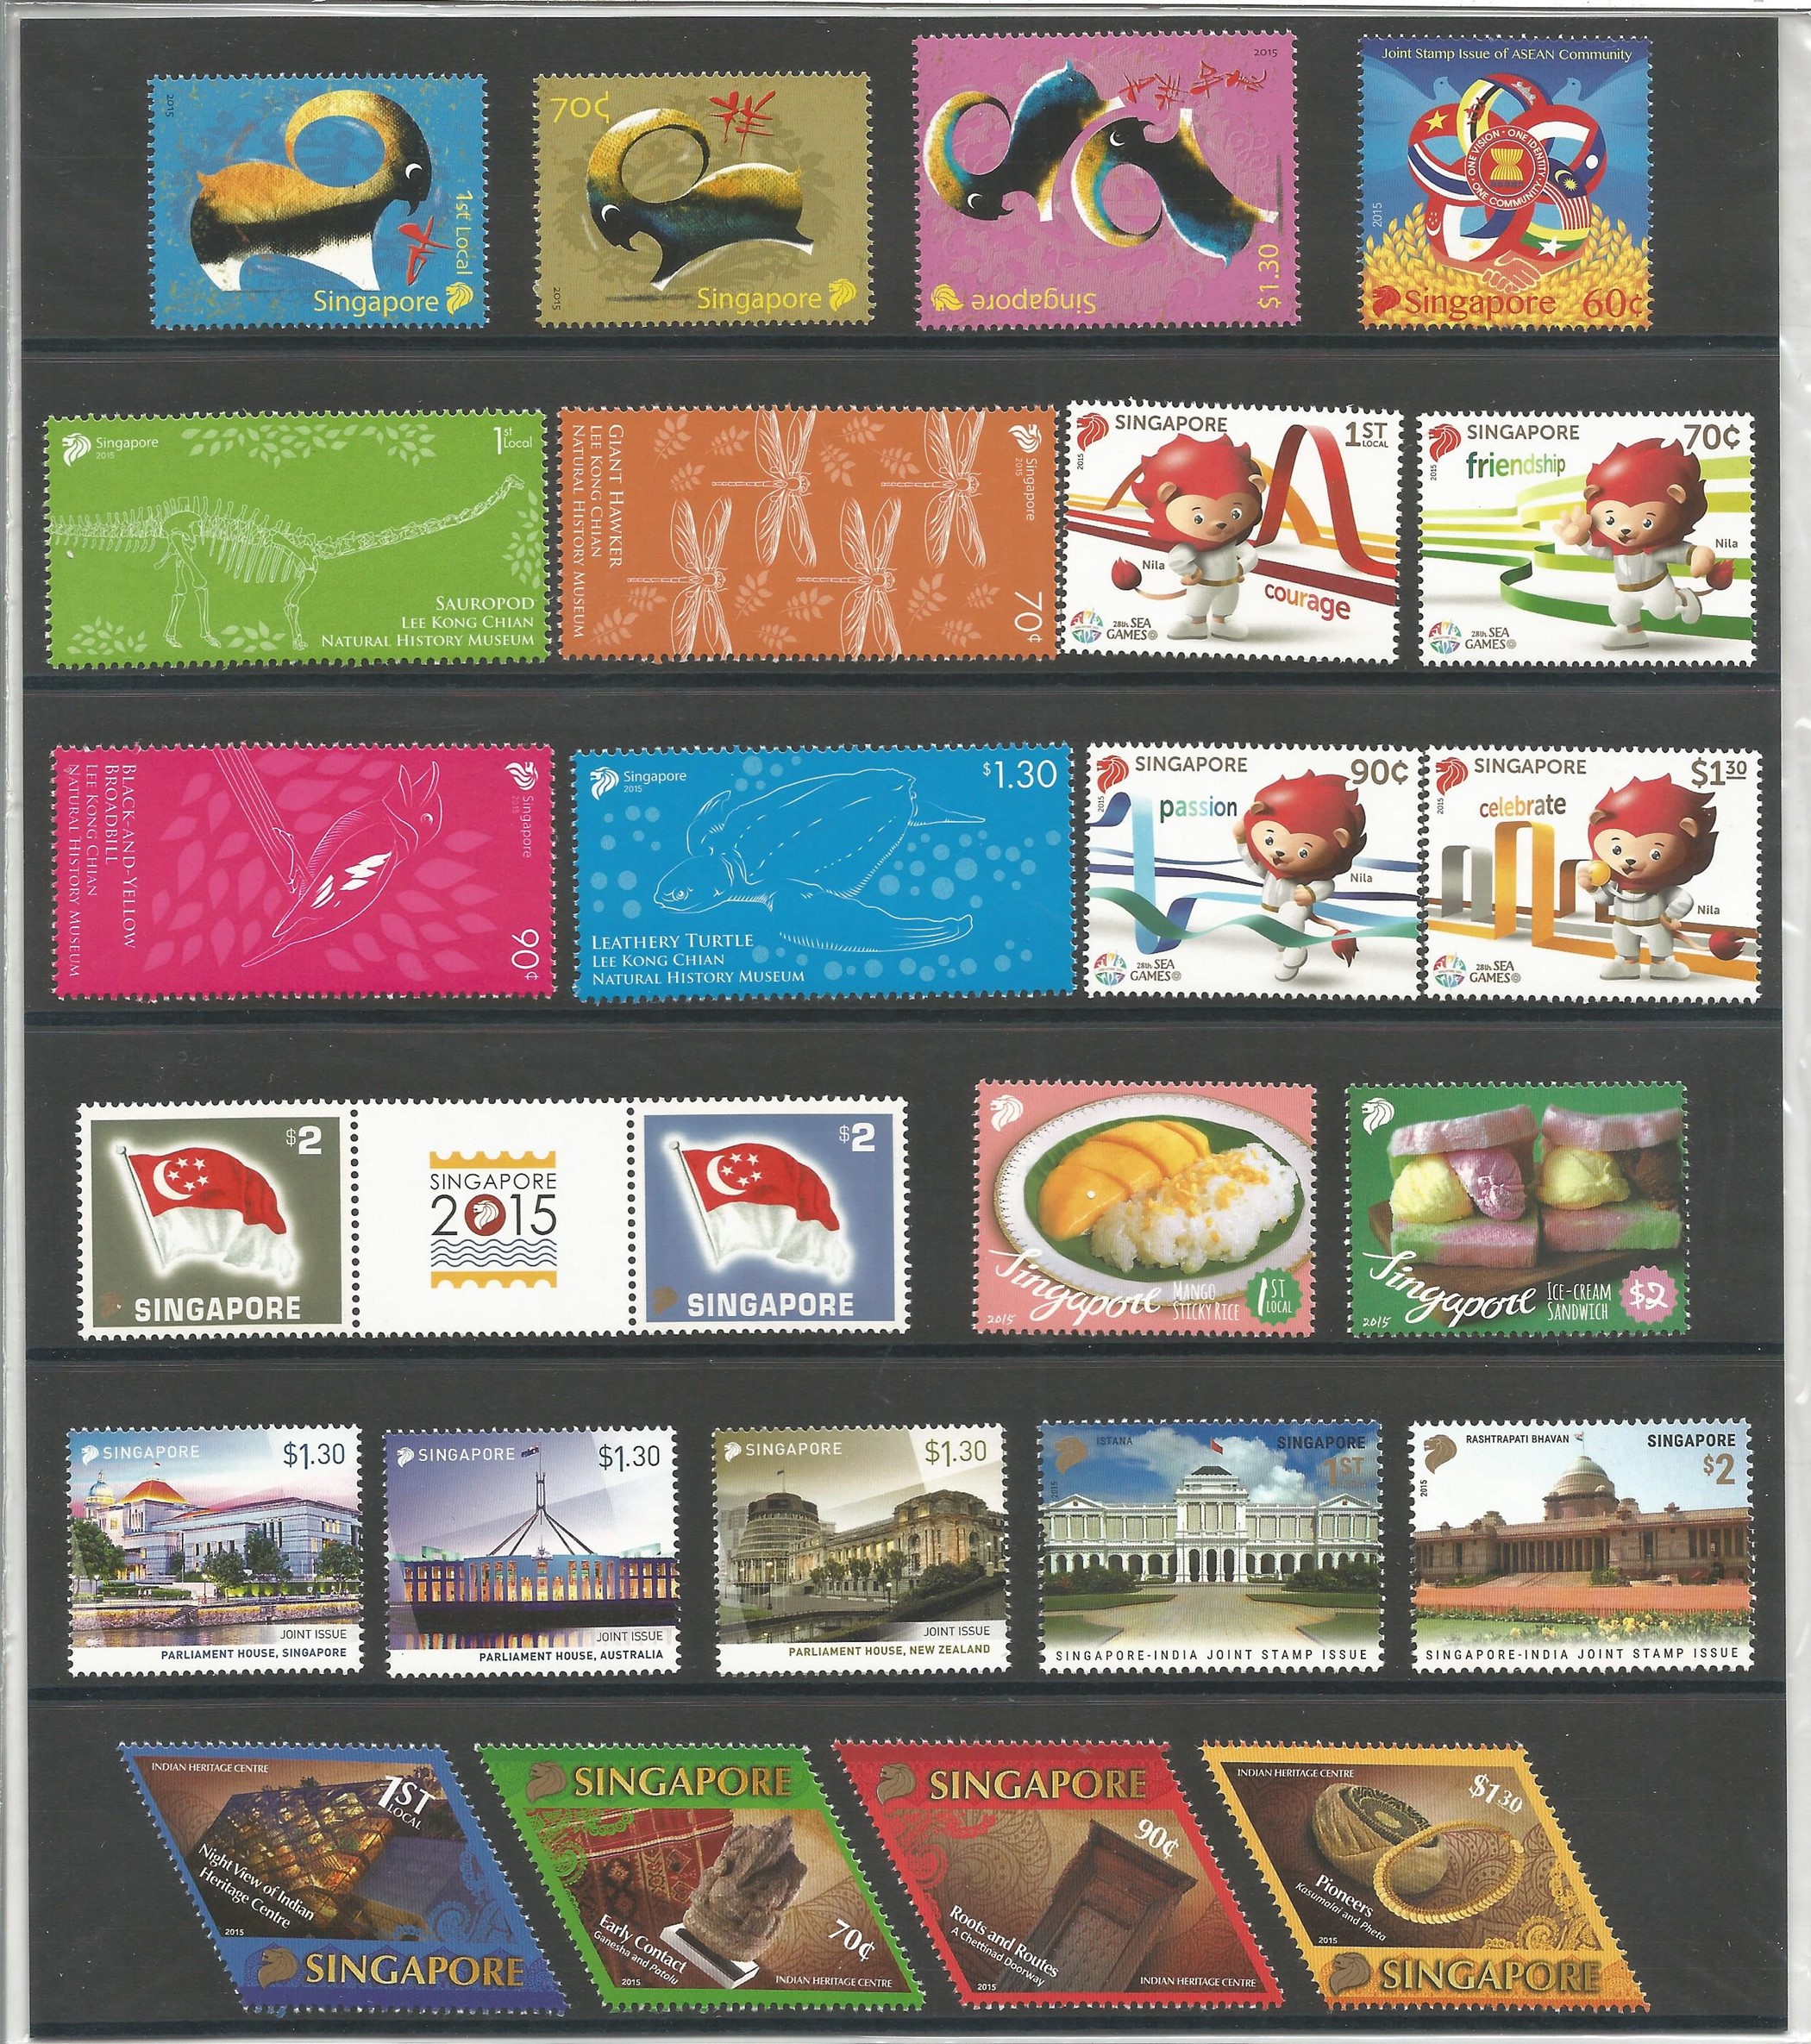 Singapore 2015 presentation book of stamps in slipcase. Unmounted mint stamps. Good condition. We - Image 2 of 2